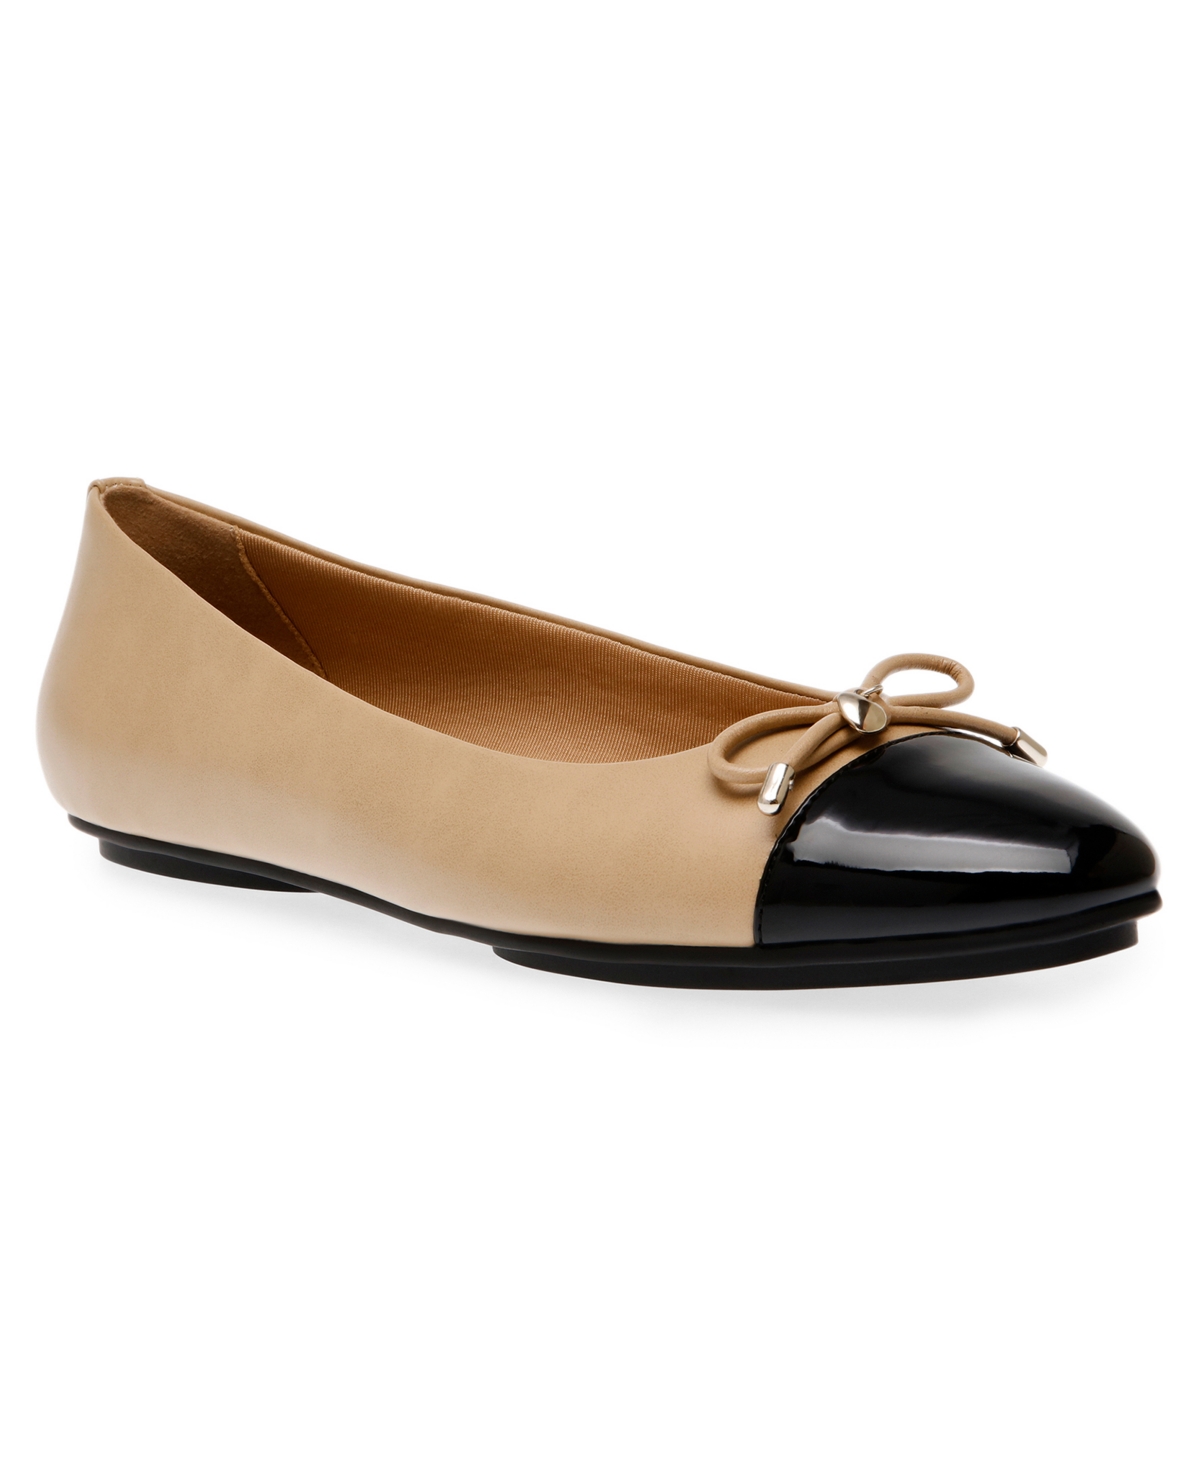 Women's Luci Flats - Nude, Black Smooth, Patent